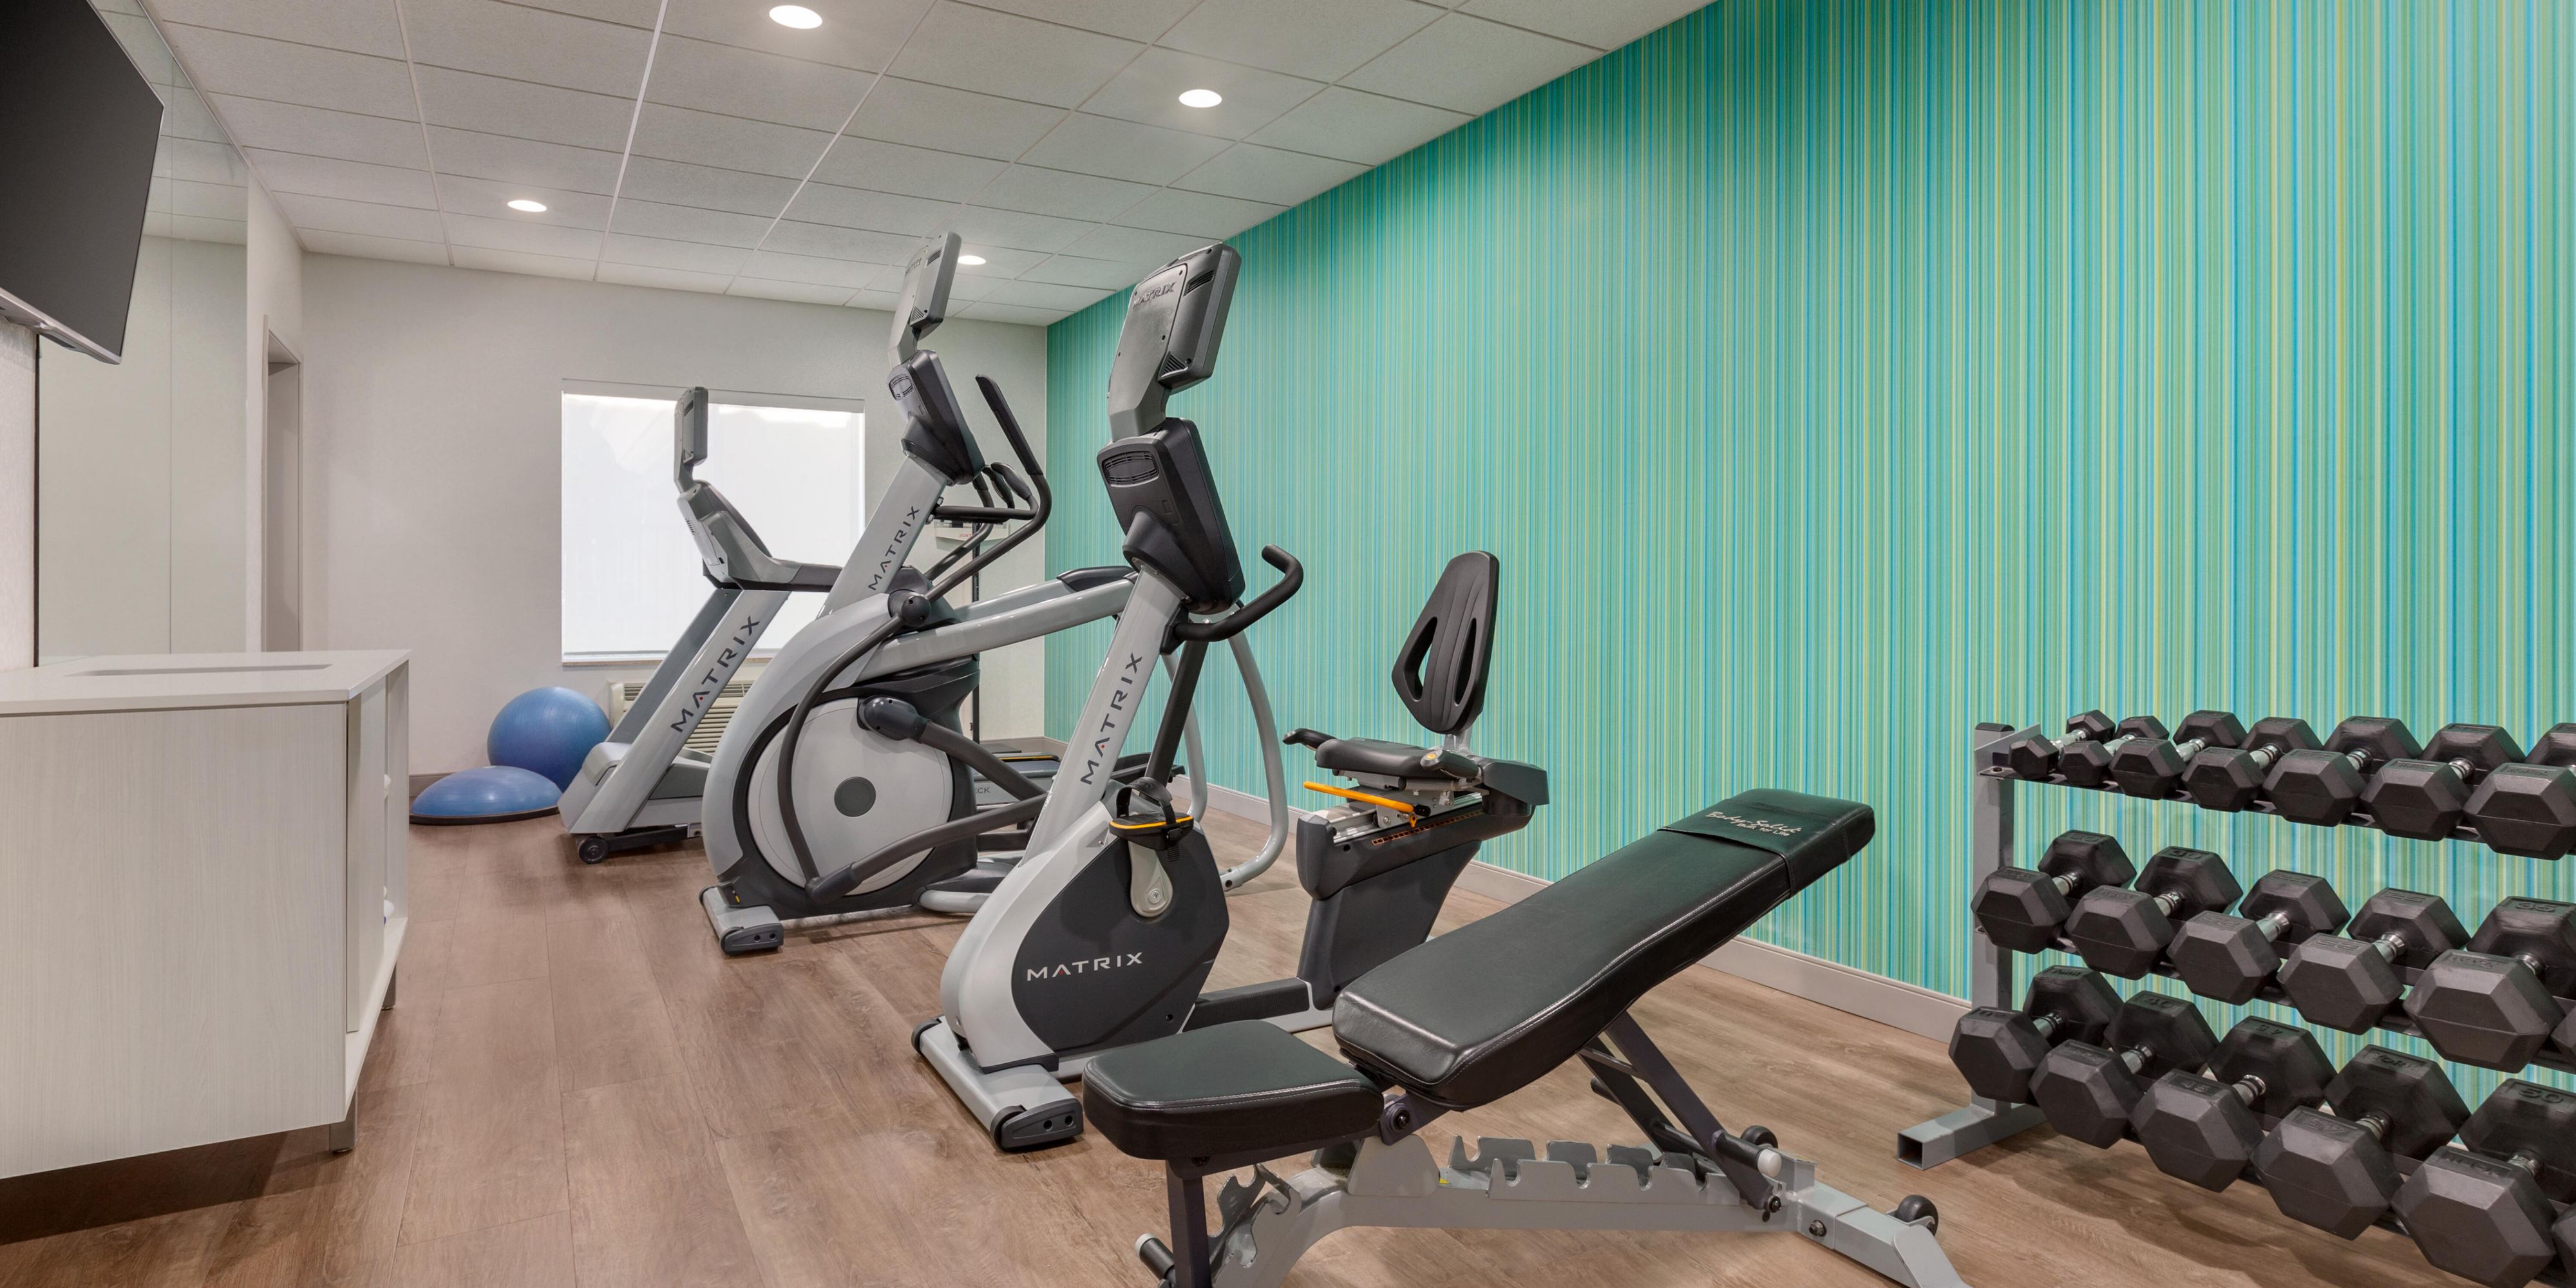 Travelers, don't sweat it, we've got you covered!. You'll find treadmills, elliptical machines, free weights or a stationary bicycle available just for you! Stay smart and fit when you stay with us!